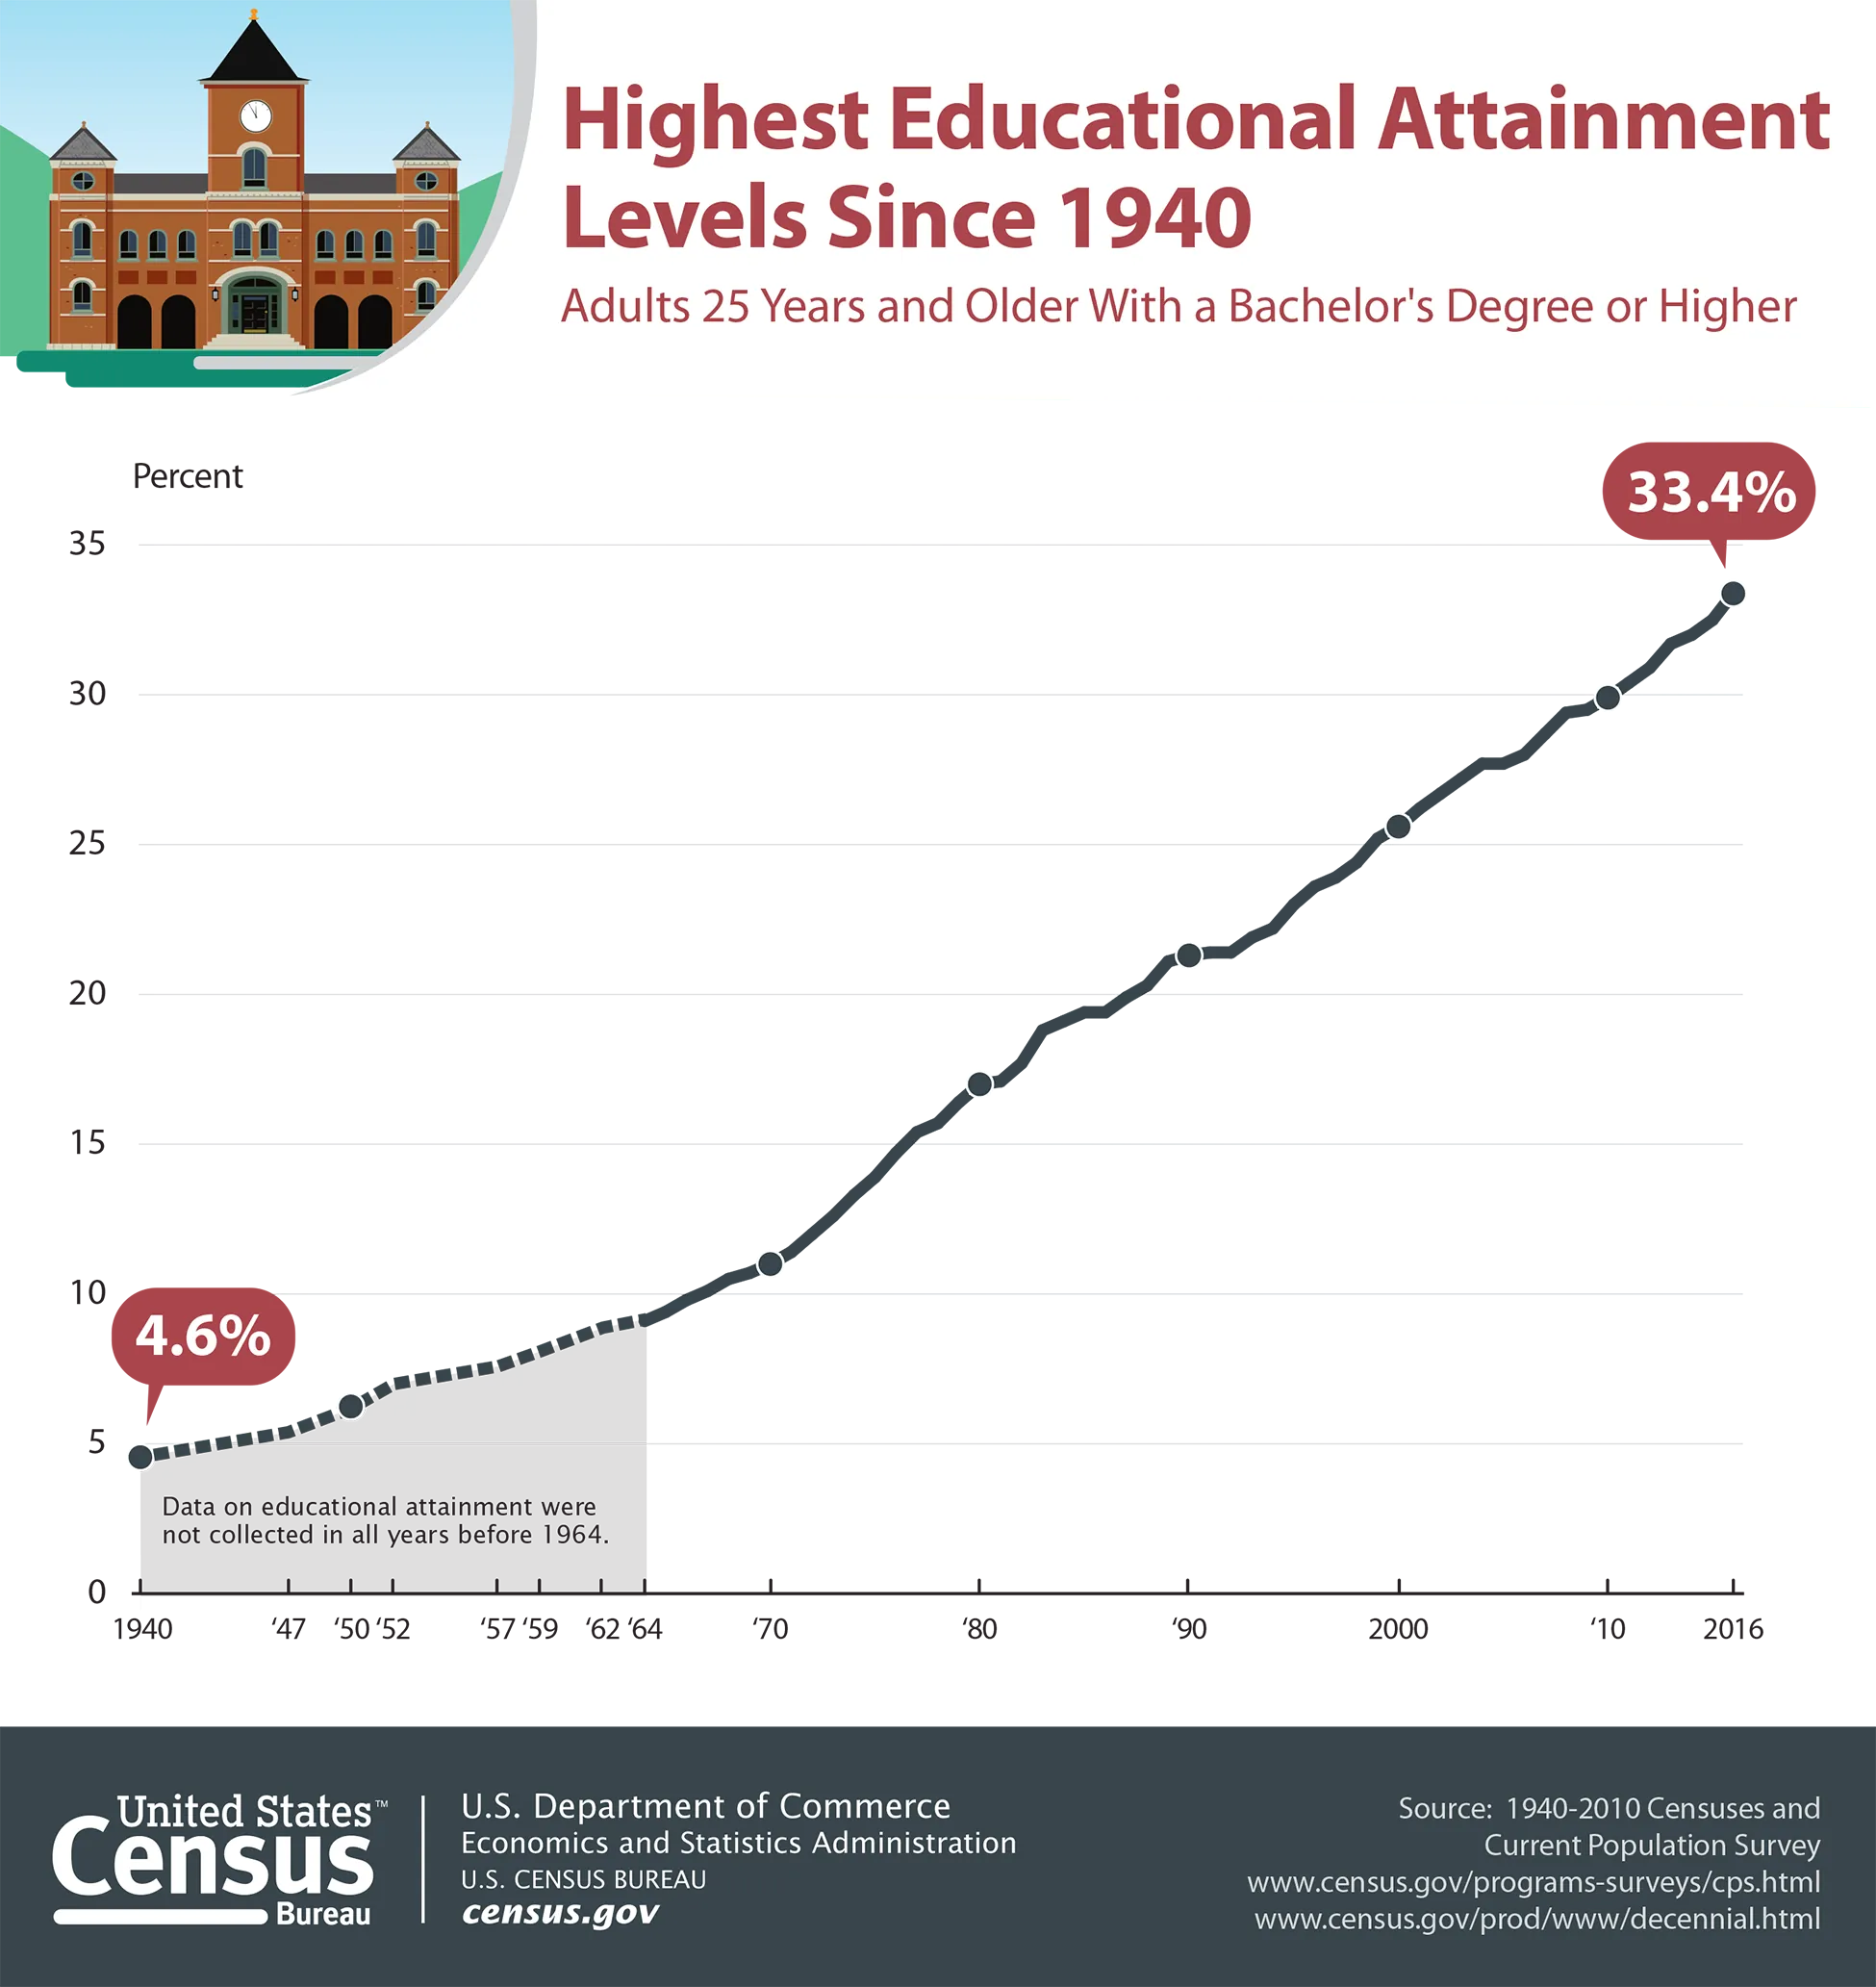 An analysis chart released by the United States Census Bureau shows a line graph plotting the highest educational attainment levels since 1940.